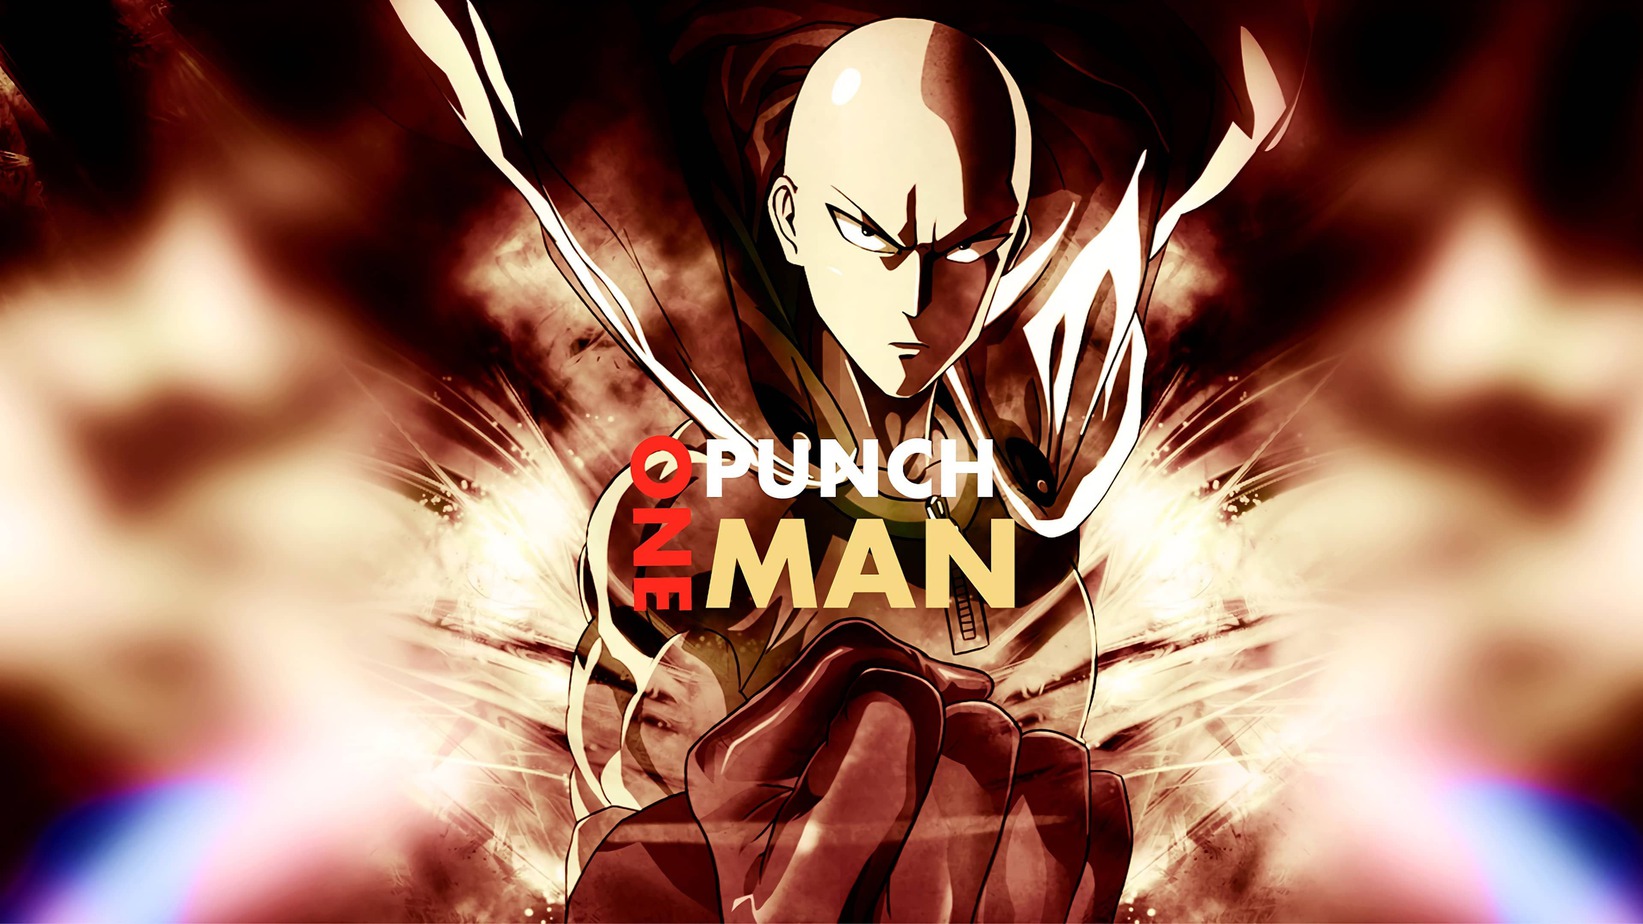 One punch man - most powerful anime character